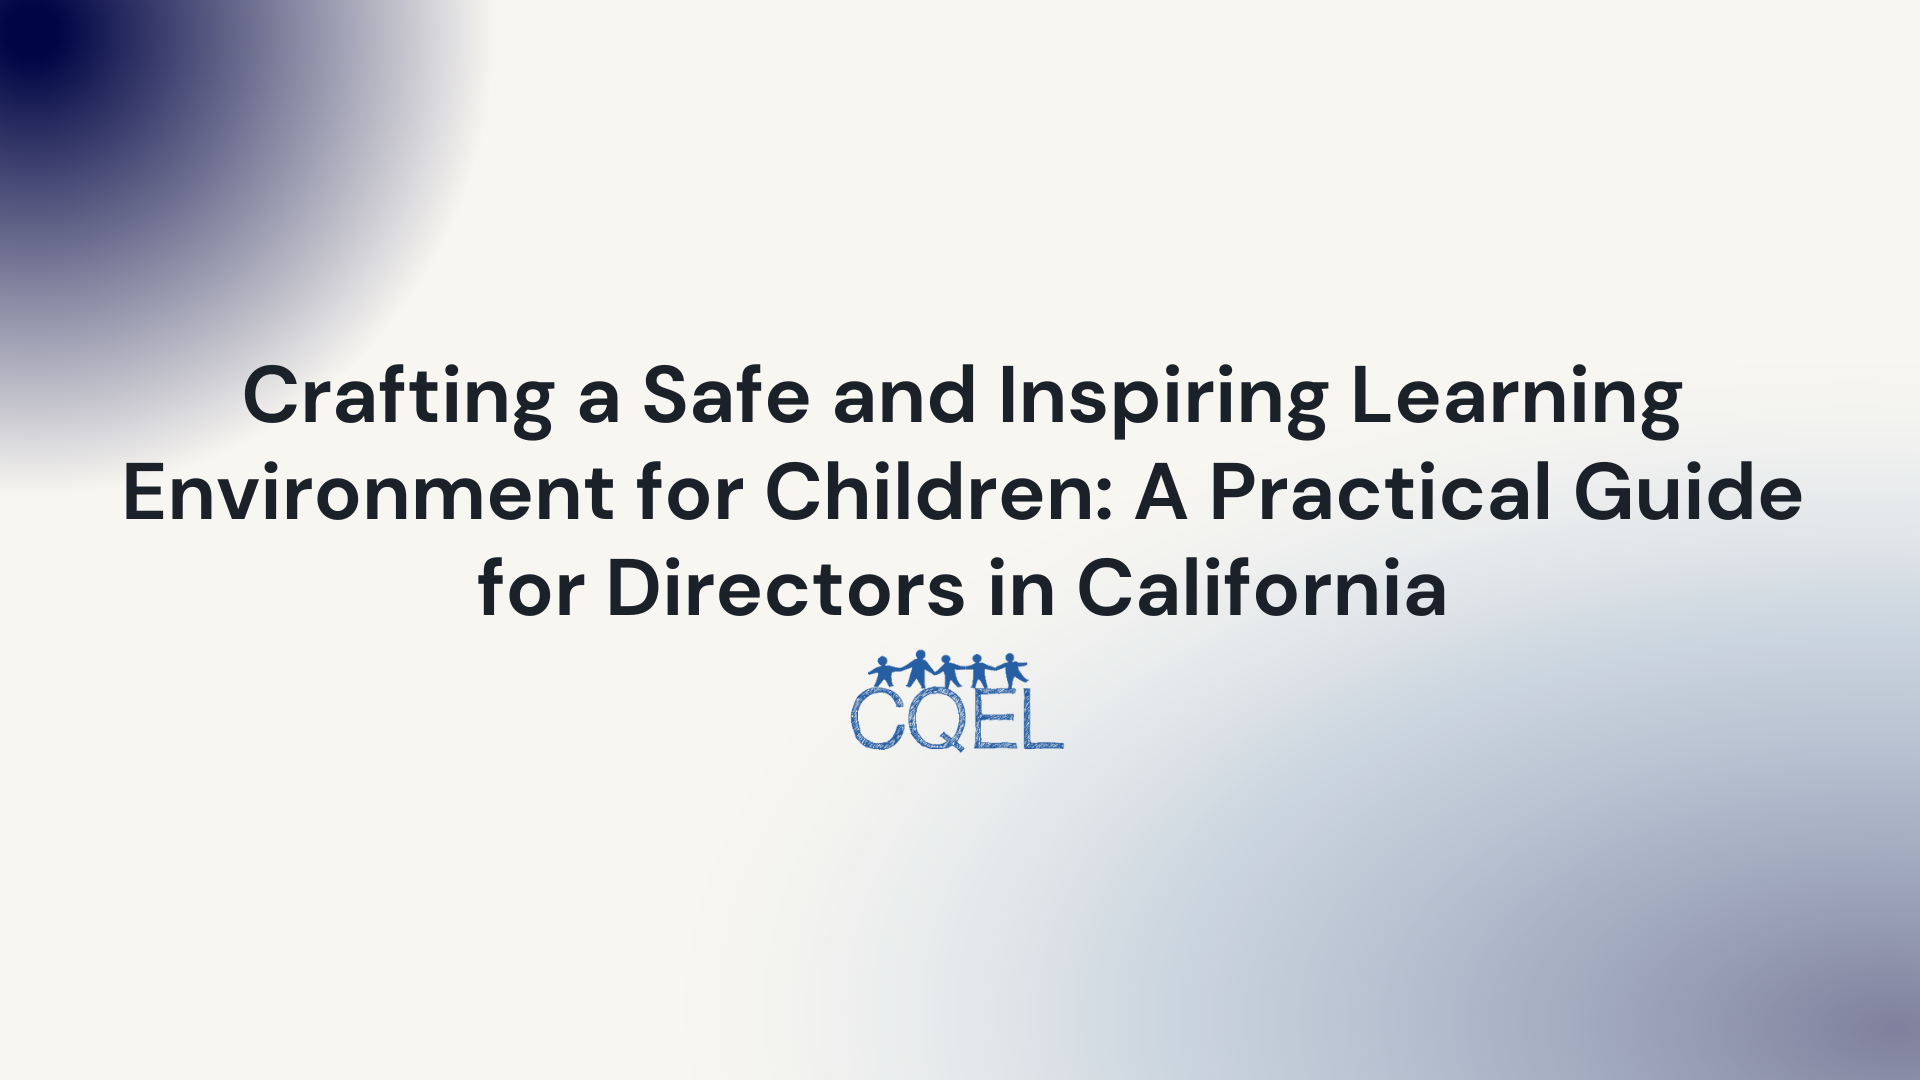 Crafting a Safe and Inspiring Learning Environment for Children: A Practical Guide for Directors in California